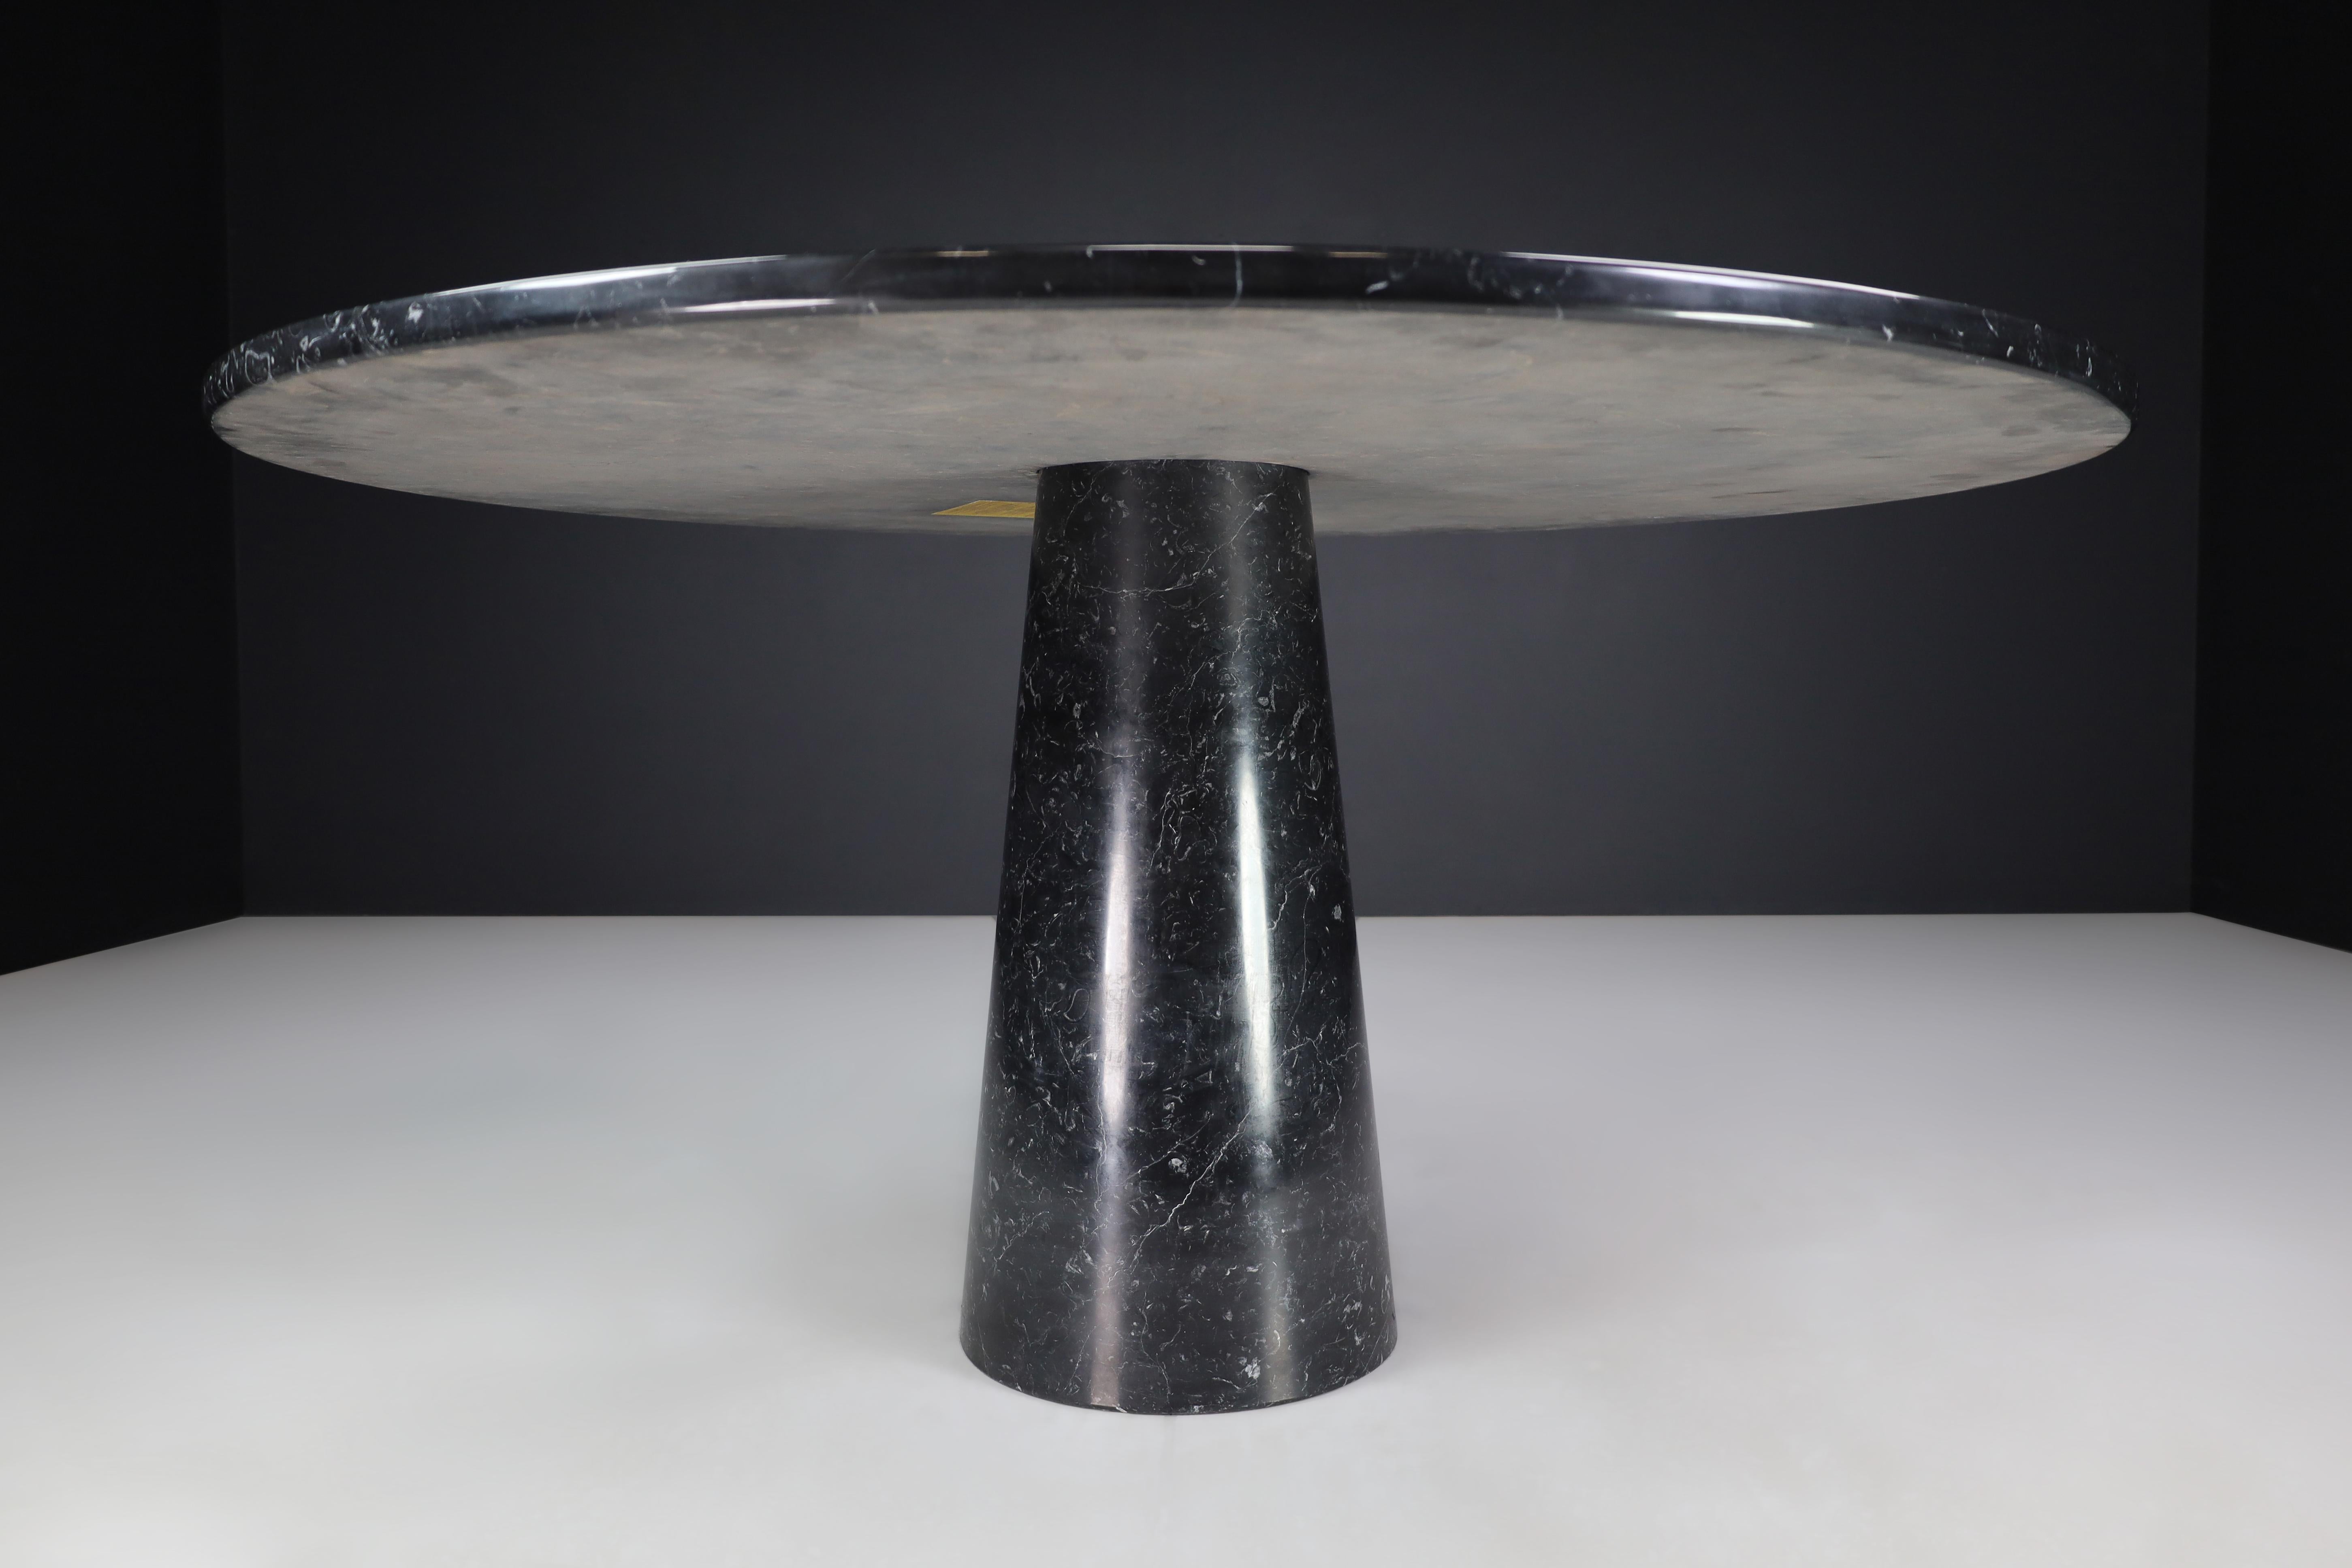 20th Century Angelo Mangiarotti for Skipper 'Eros' Round Dining Table in Marquina Marble 1970 For Sale